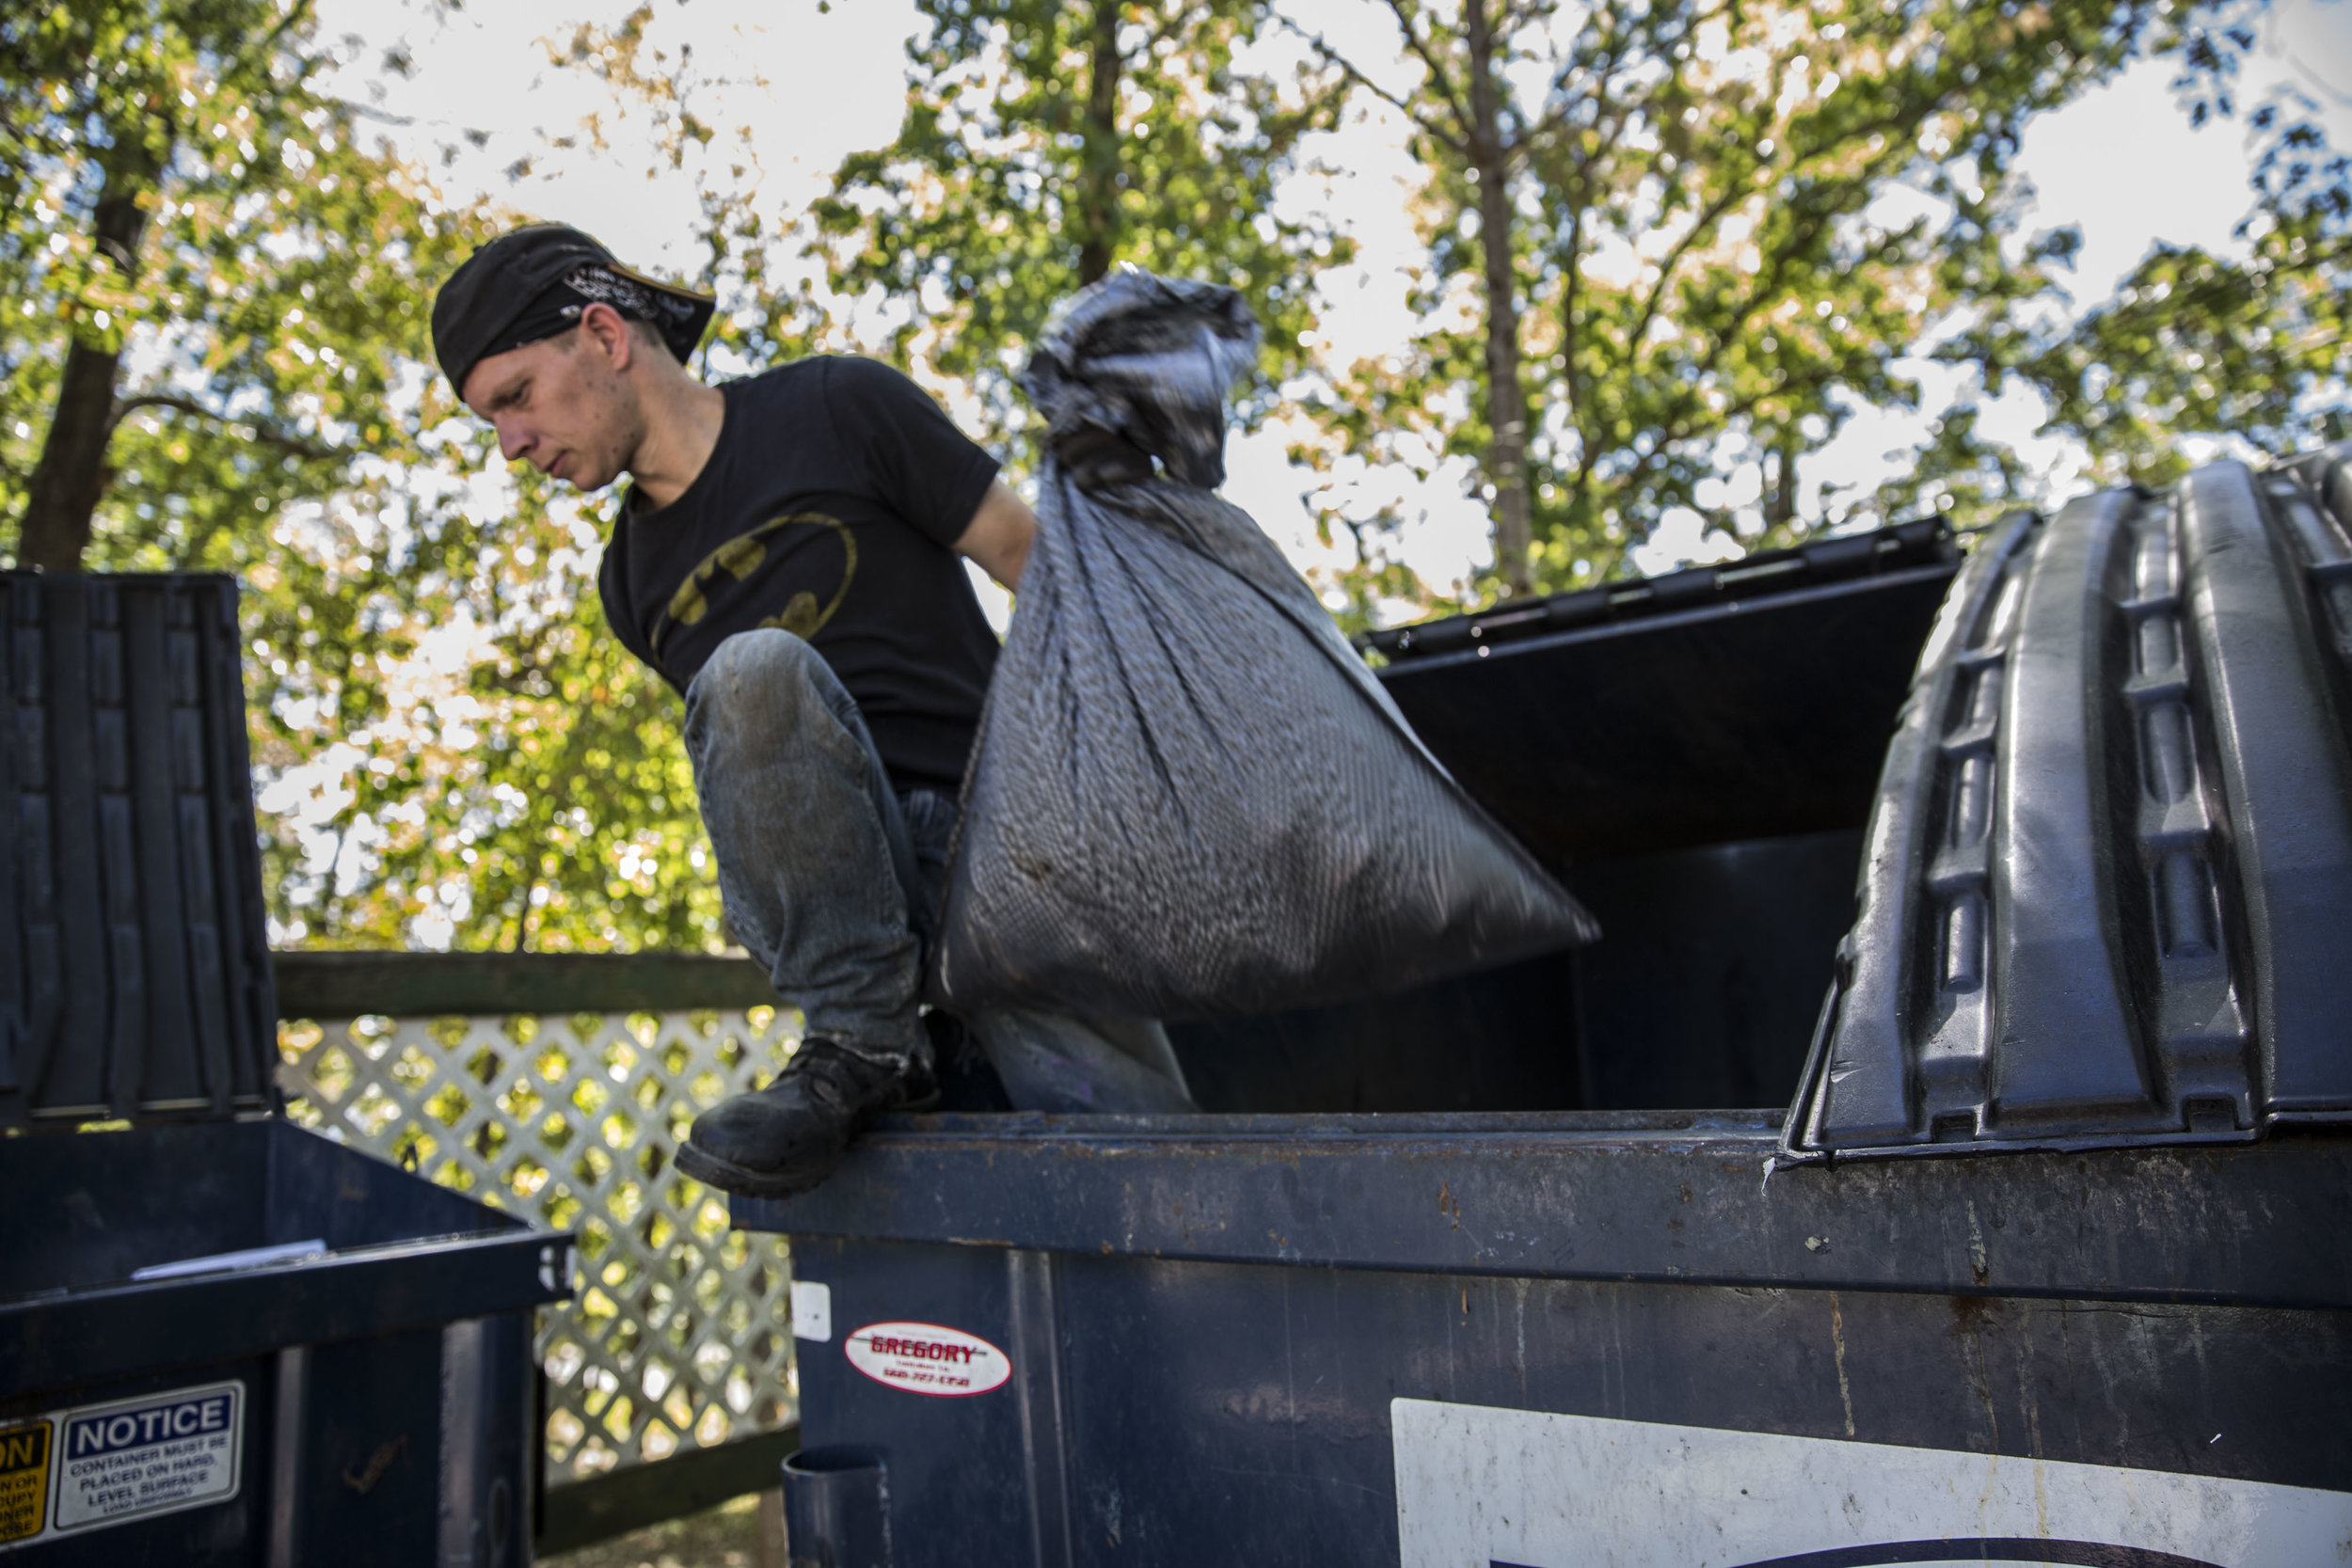   Chris dumpster dives looking for metal scraps and useful items. Currently unemployed, he manages to make some income from scrapping, which would make him roughly $23 a day. “I don’t go stealing like some of these kids. If I have to go without eatin